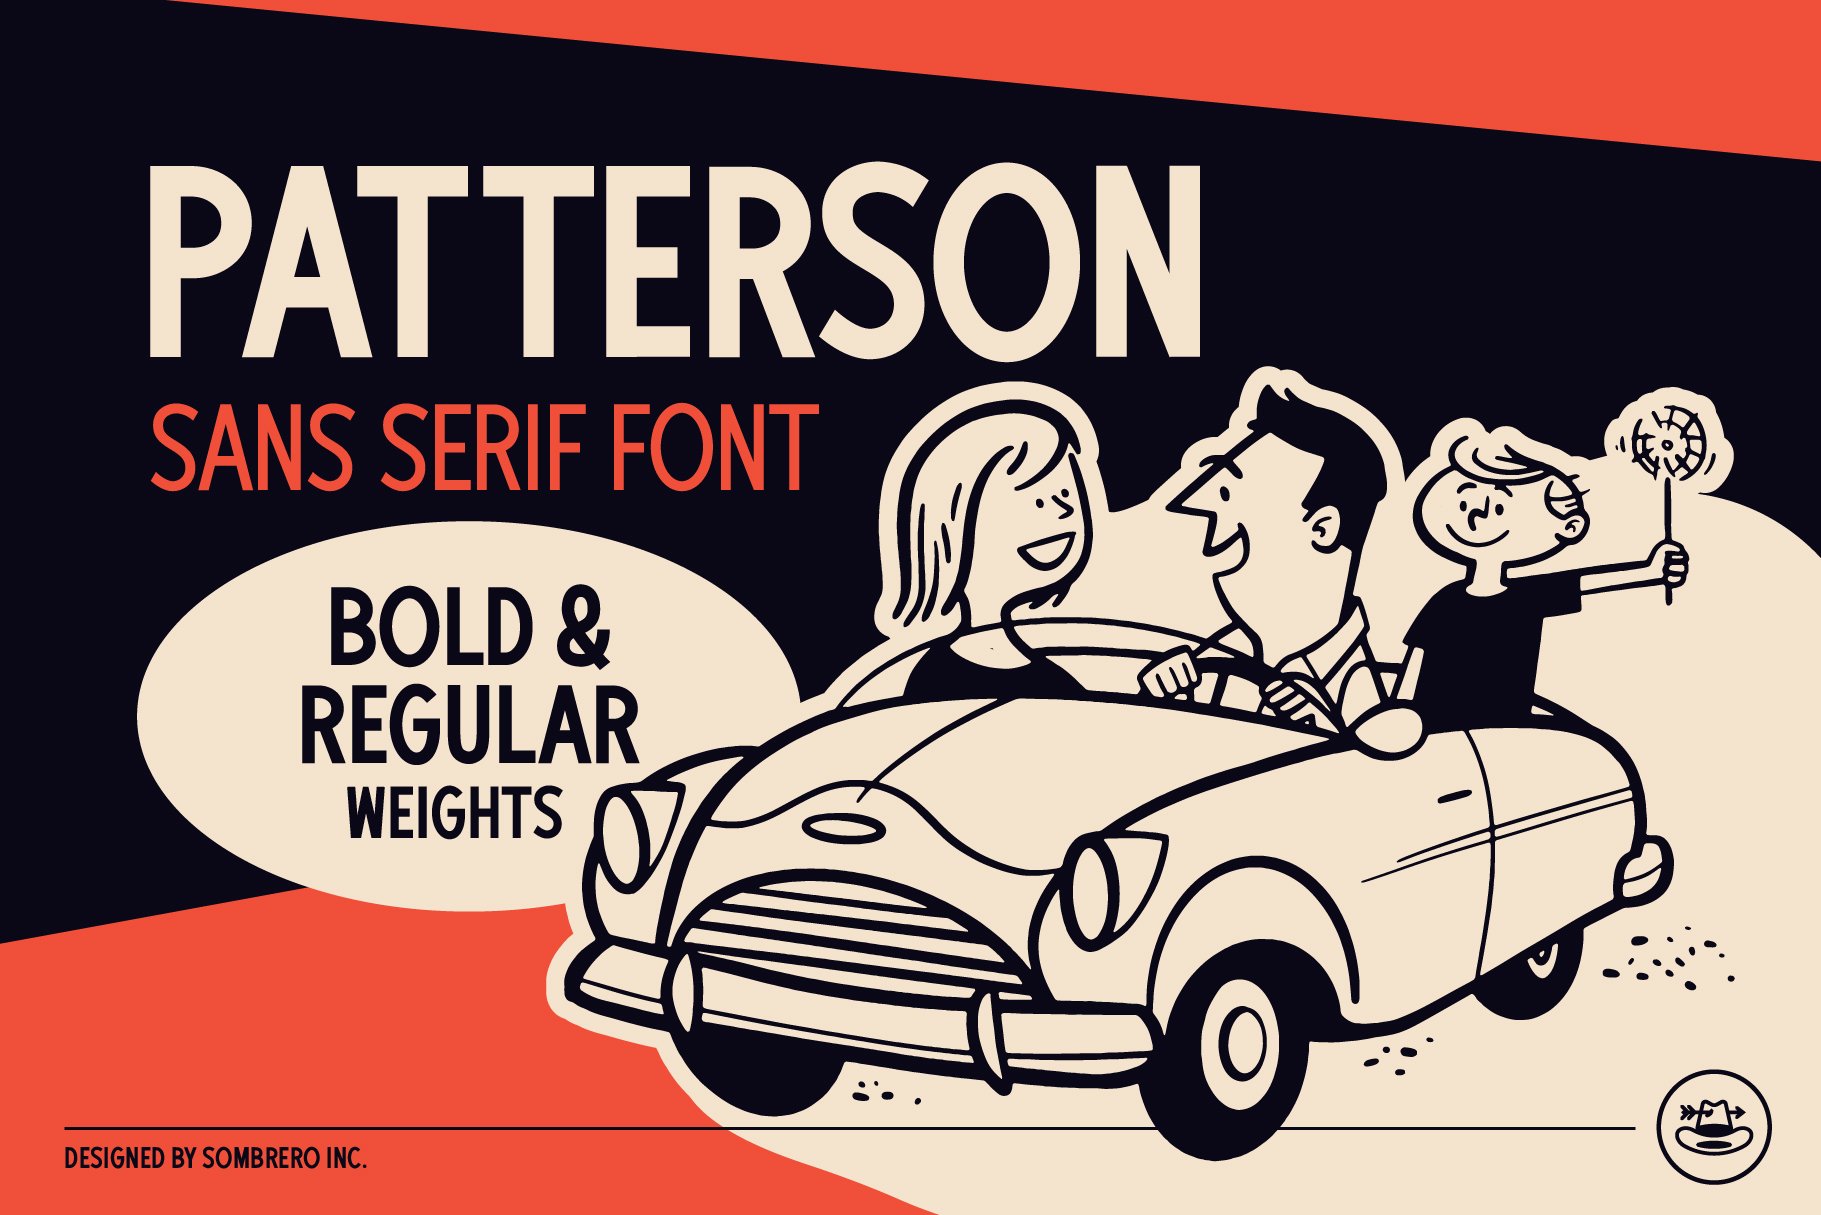 Patterson Display Font cover image.